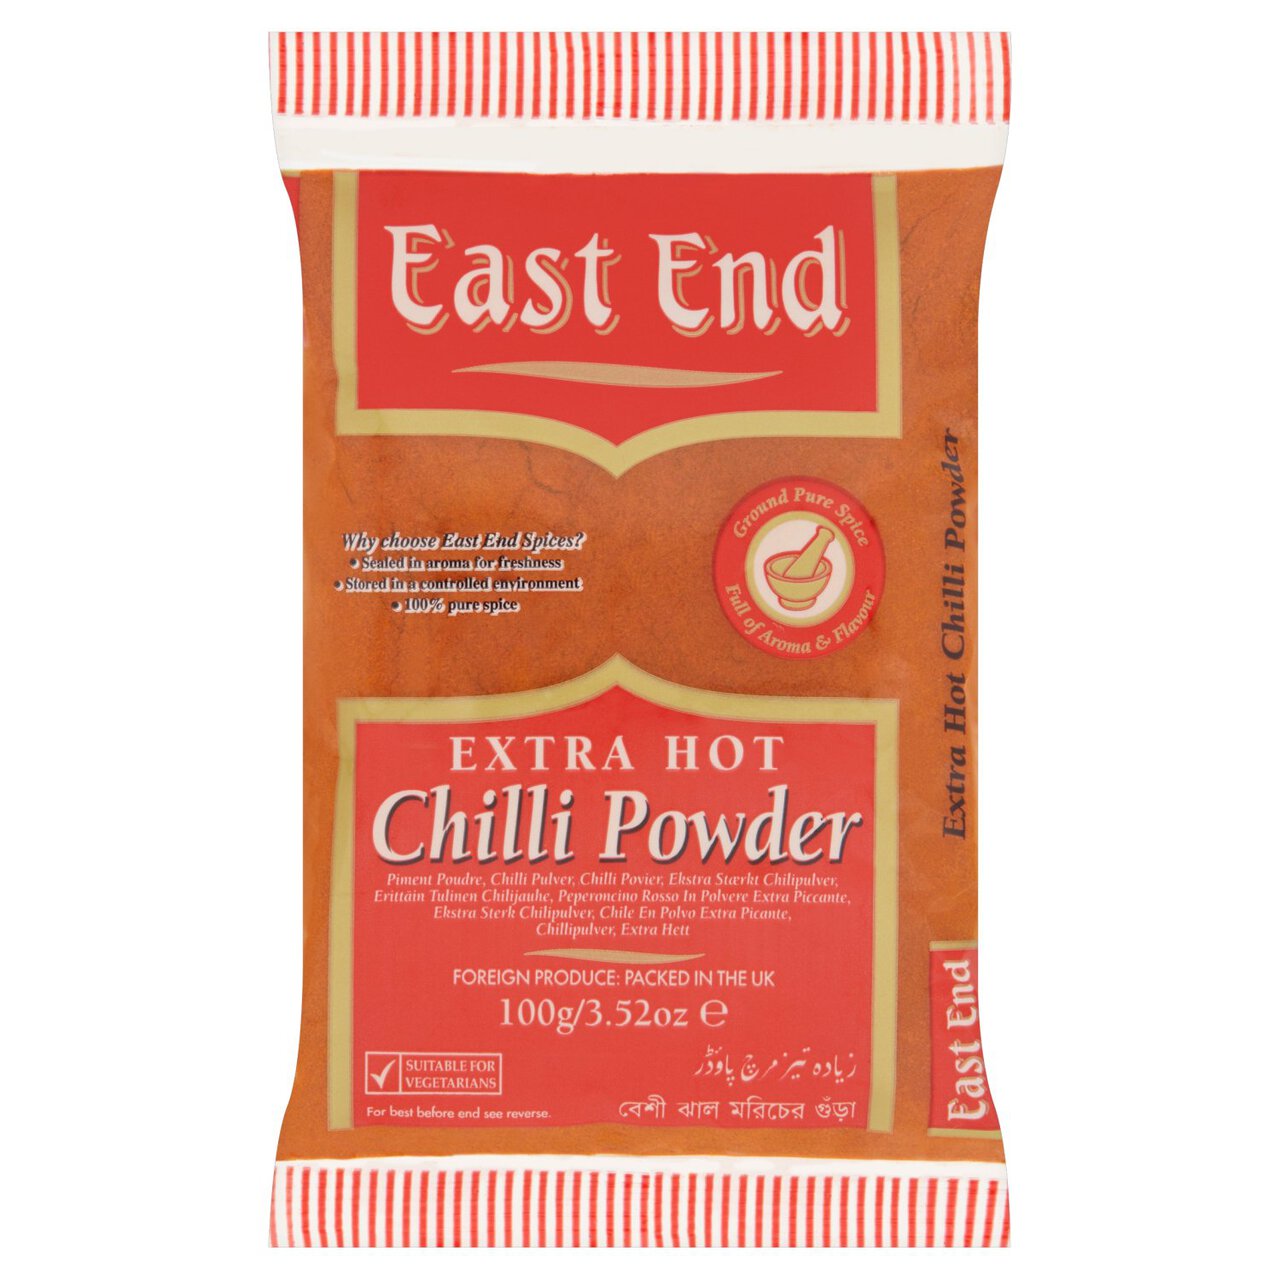 East End Chilli Powder Extra Hot 100g